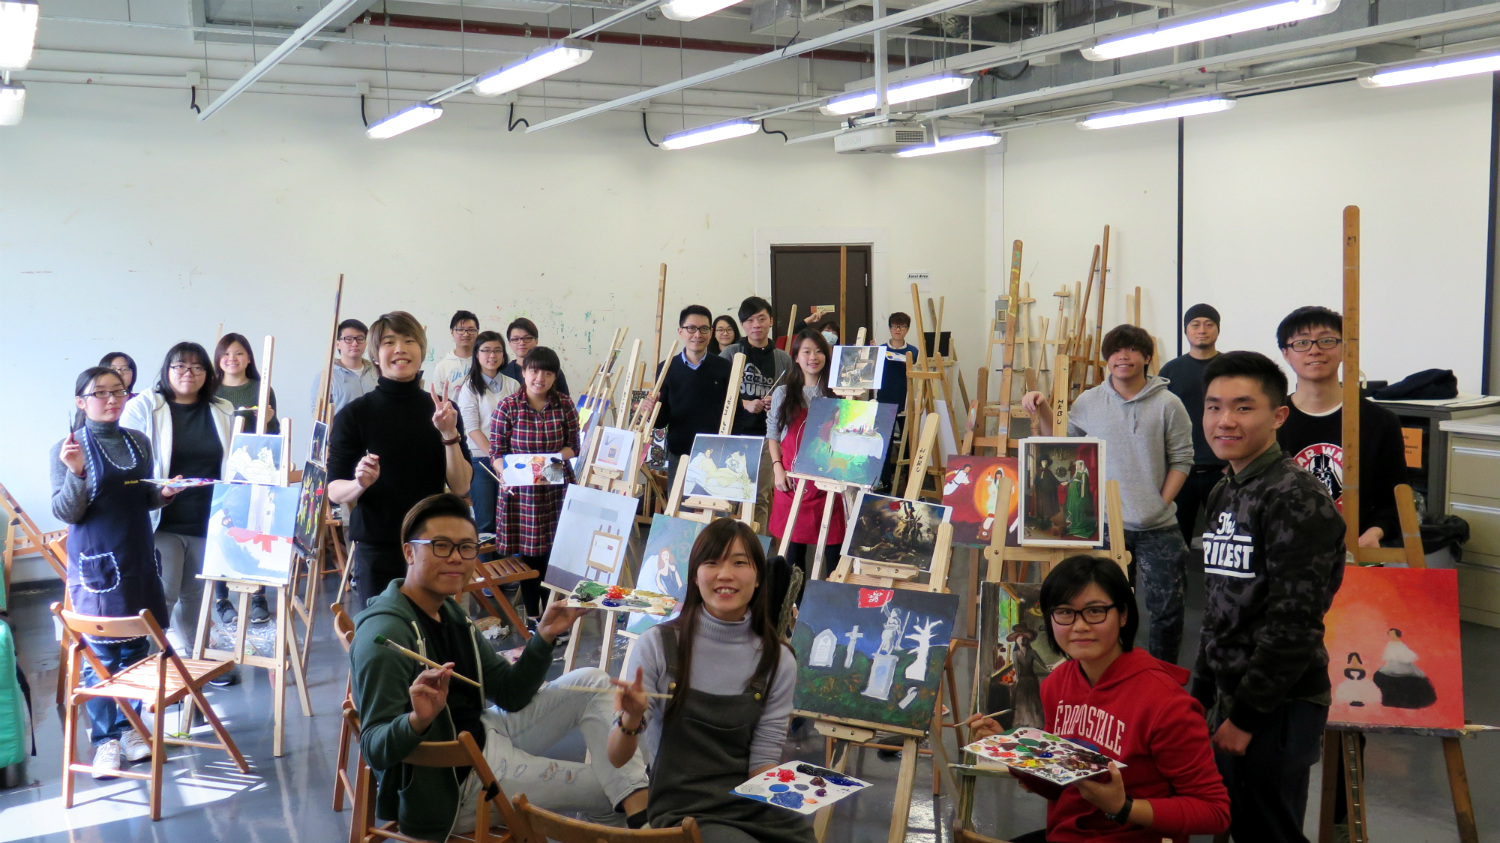 Students were painting at individual easels at the painting studio of the Academy of Visual Arts.